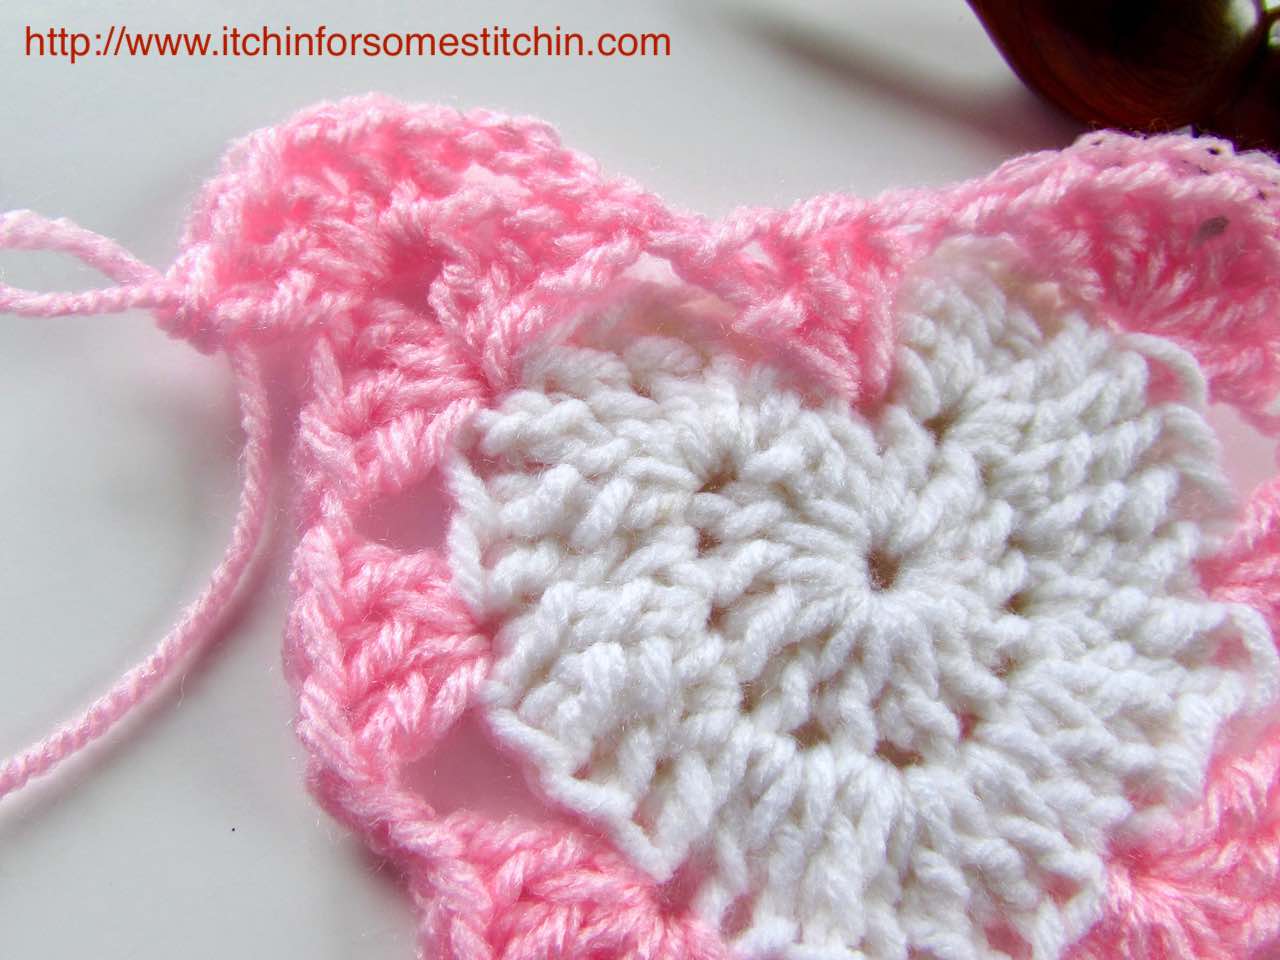 How to crochet a Granny Heart Square tutorial by https://www.itchinforsomestitchin.com